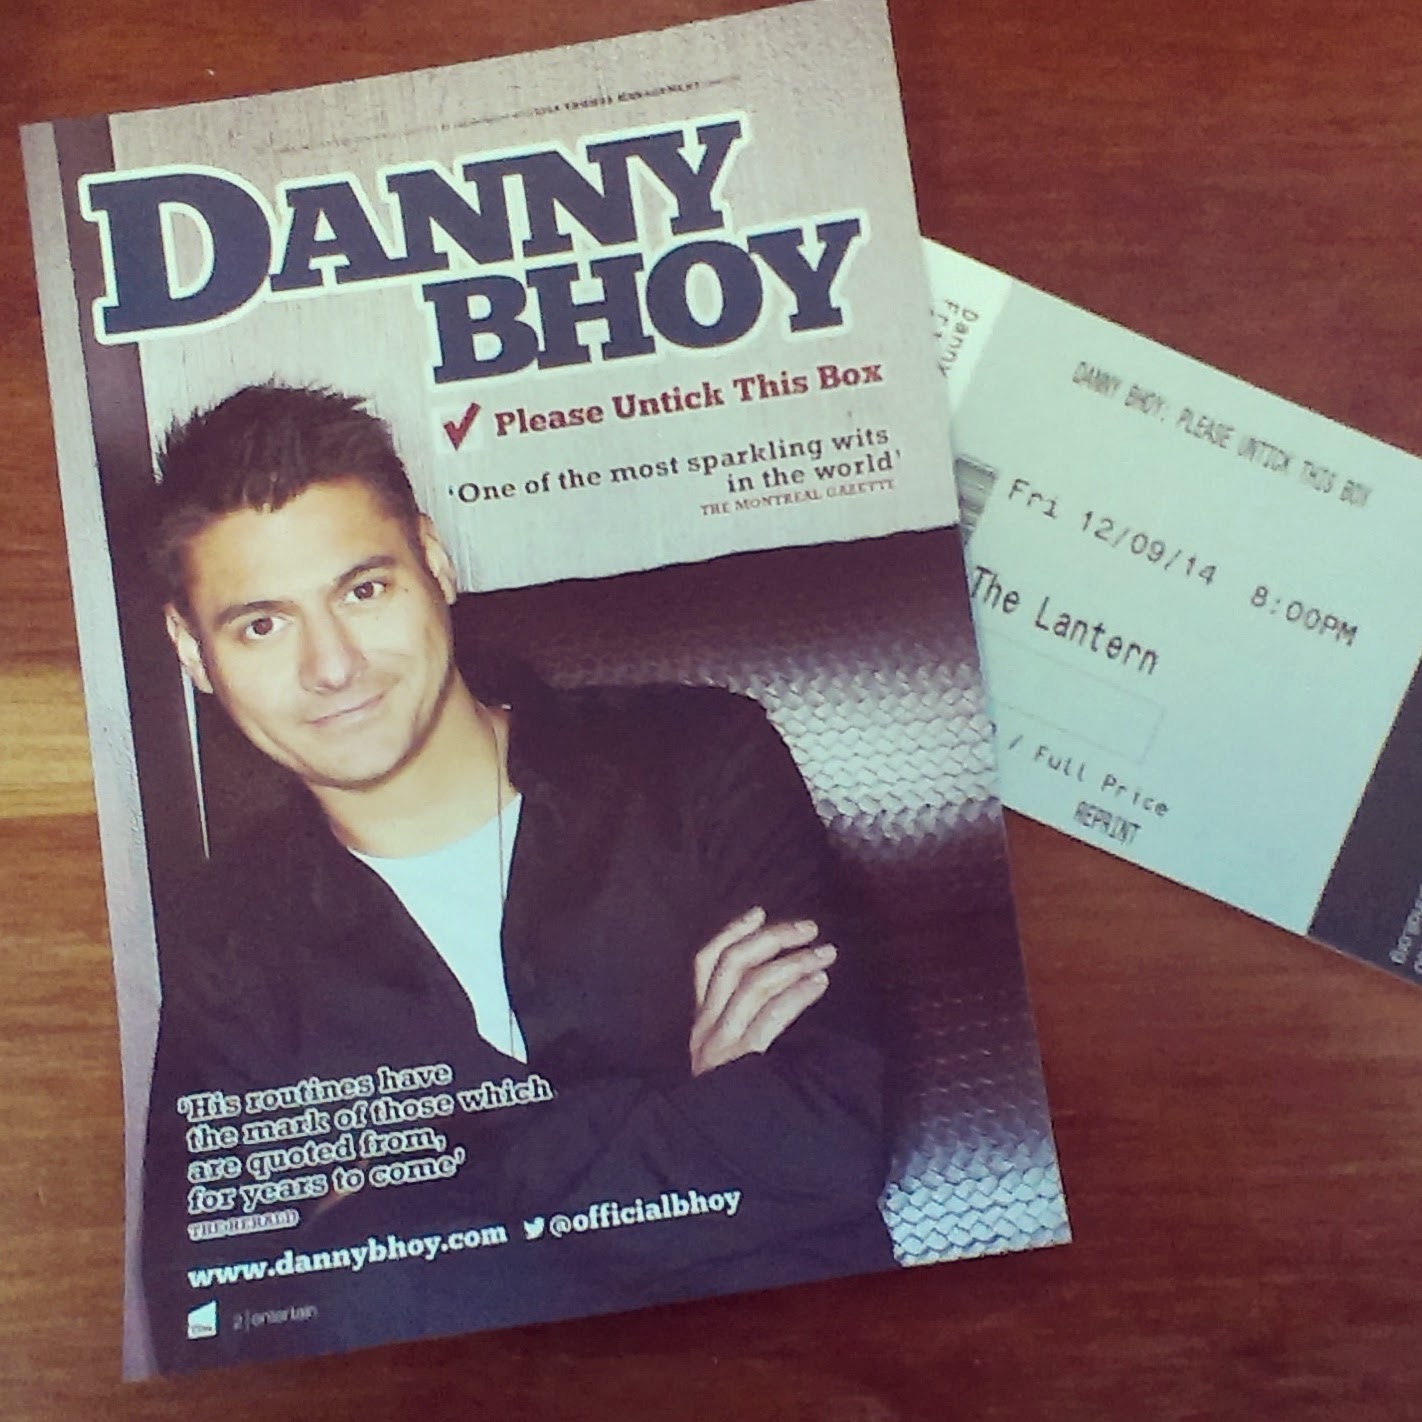 Danny Bhoy leaflet and tickets